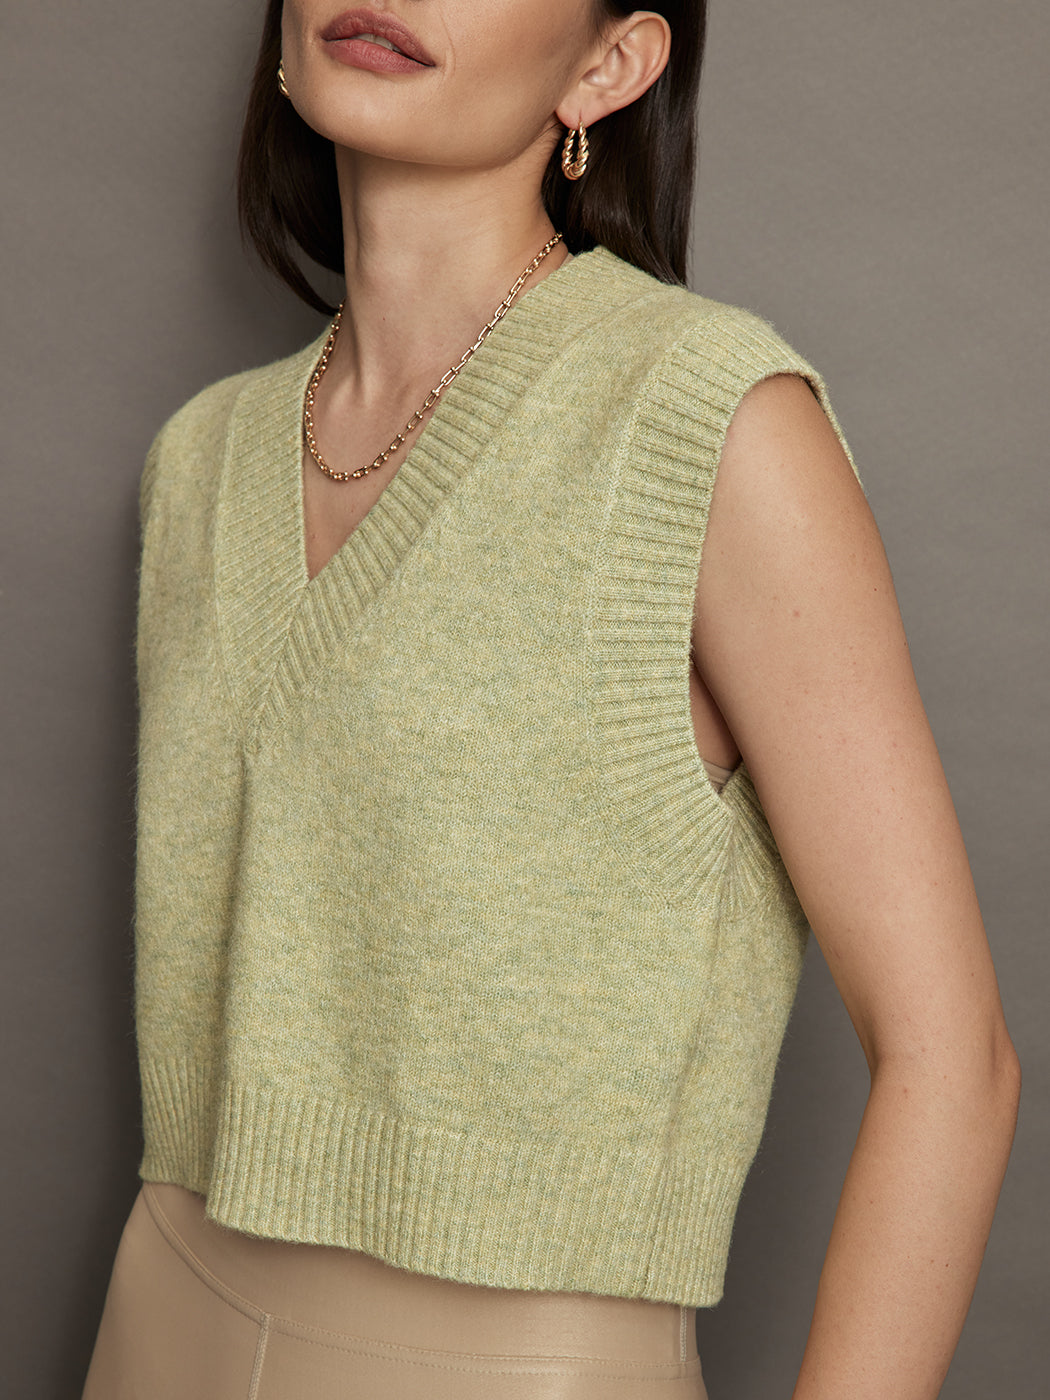 ARTHUR CABLE KNIT SWEATER